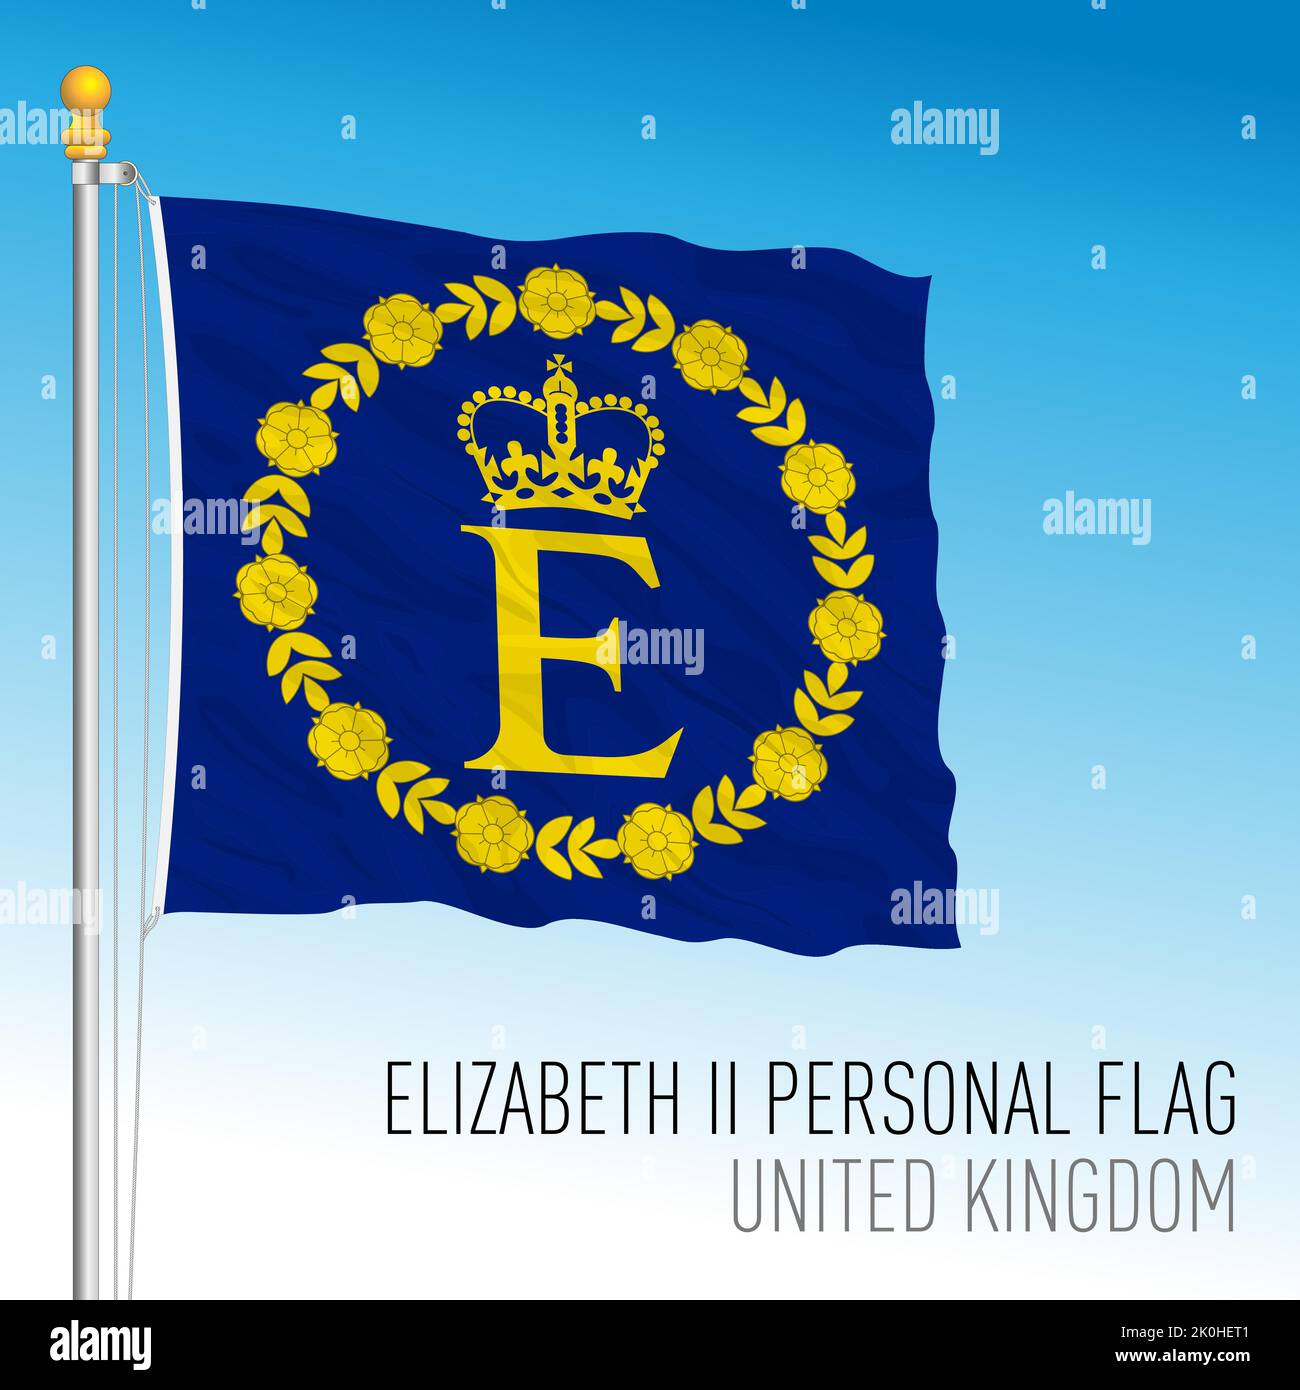 Queen Elizabeth the second personal historical flag, United Kingdom, vector illustration Stock Vector